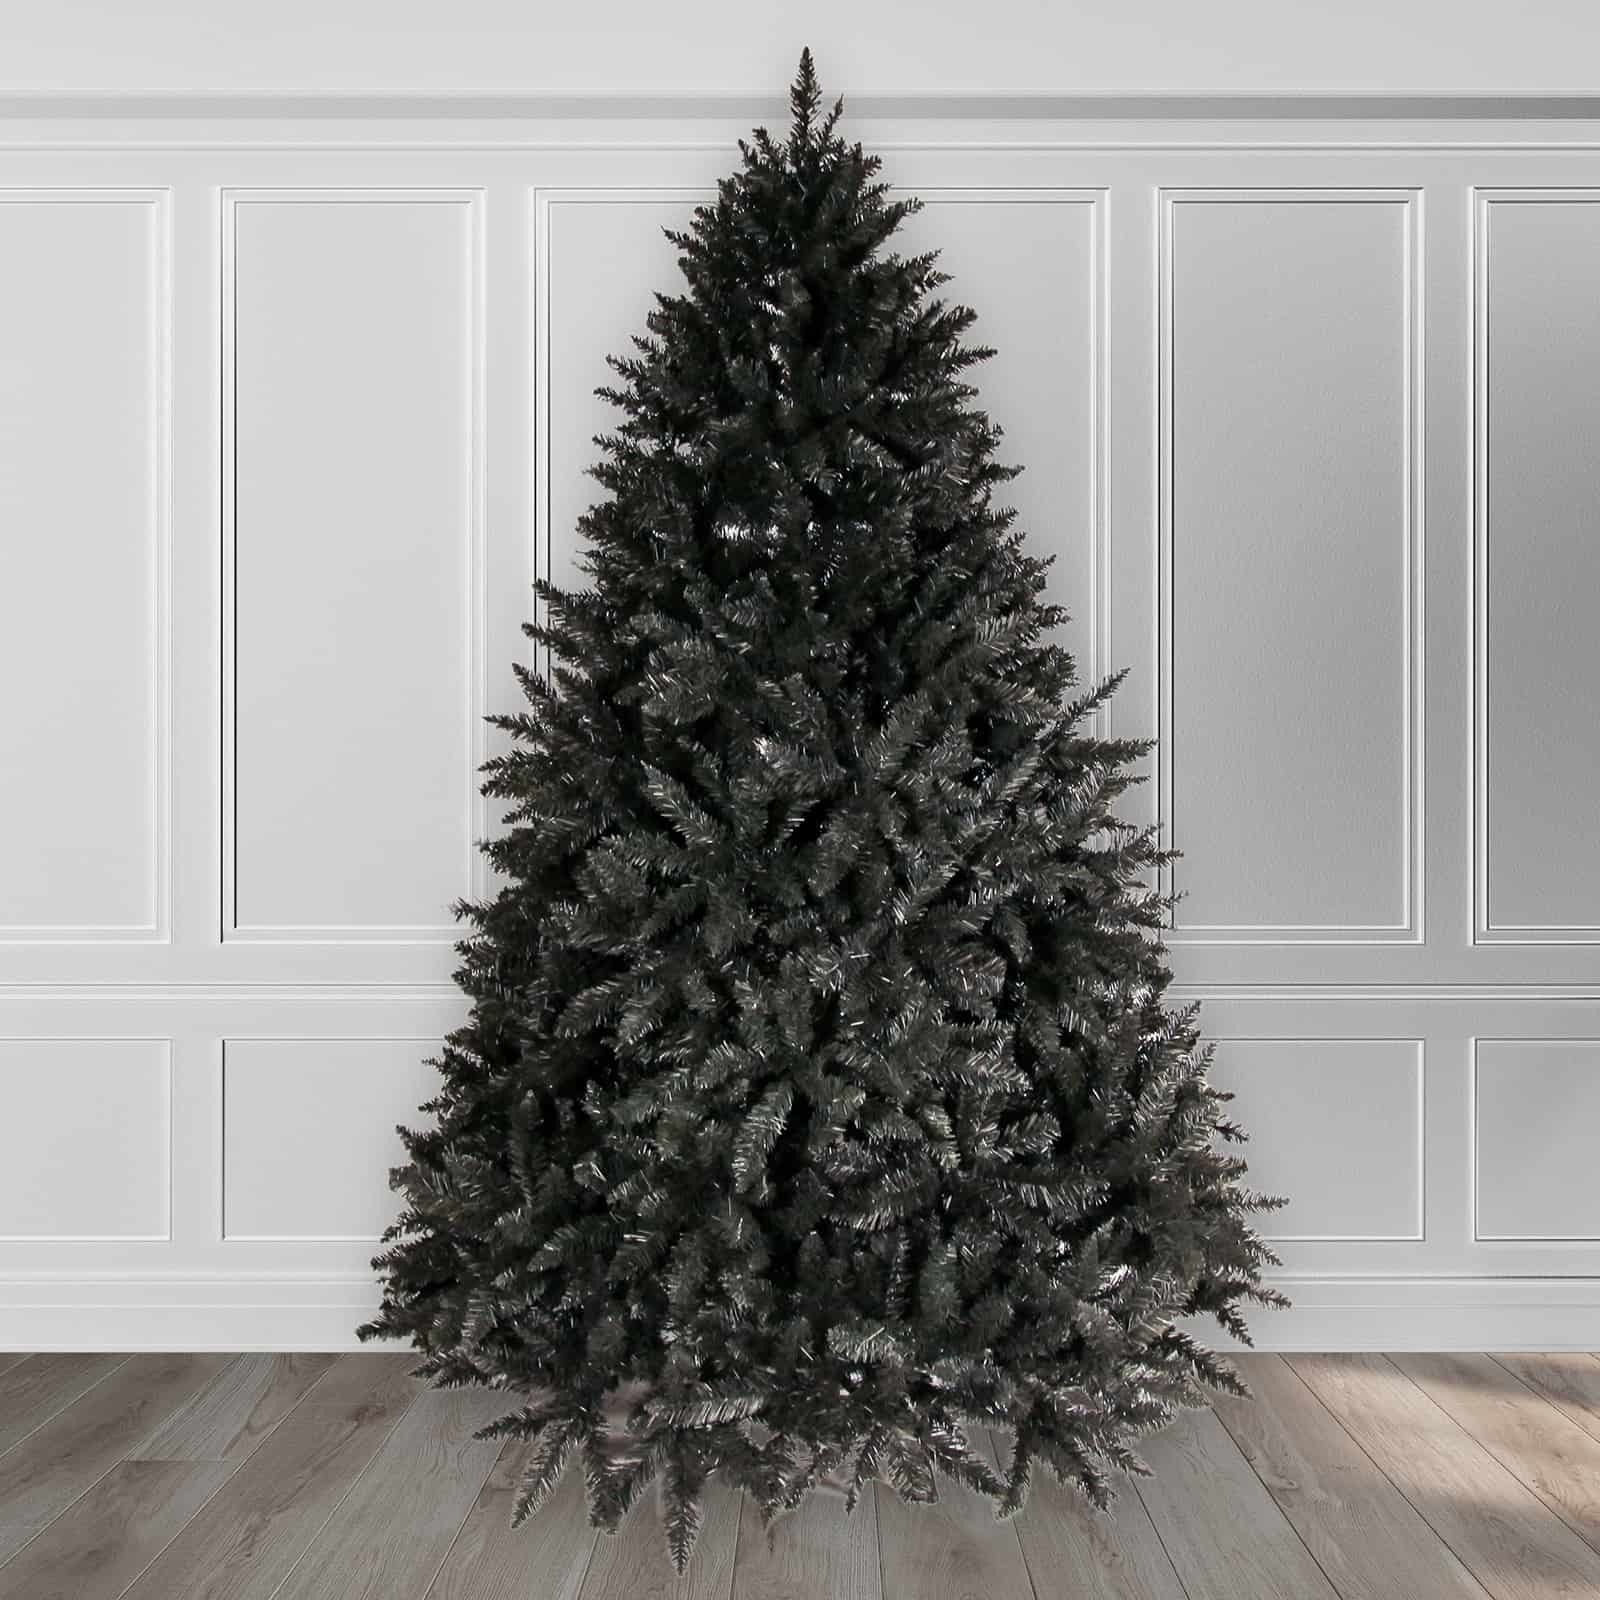 Albums 101+ Wallpaper Black Christmas Tree With Red Ornaments Latest